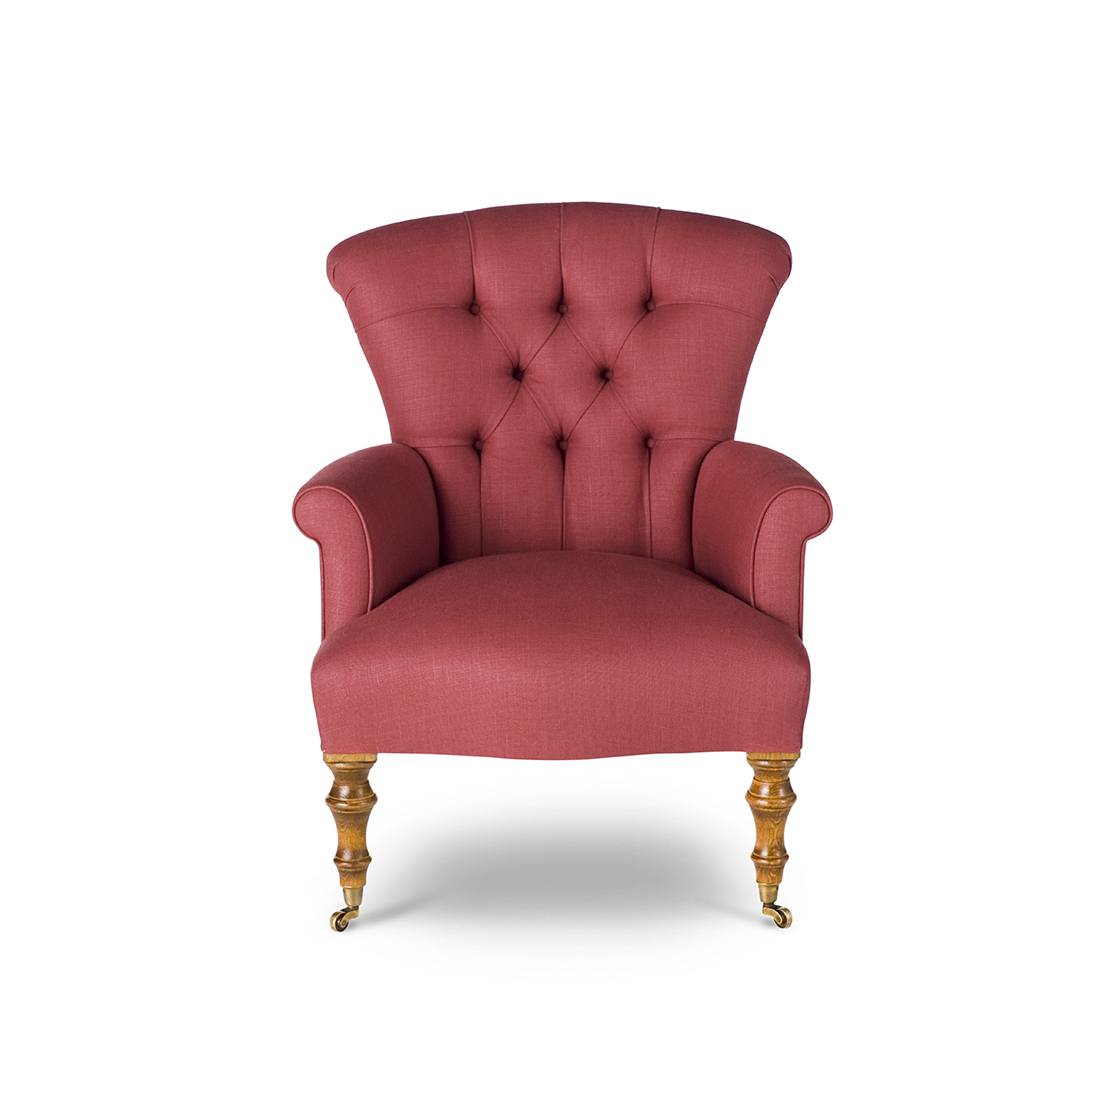 Victorian chair in Bantry linen - Lacquer red - Beaumont & Fletcher